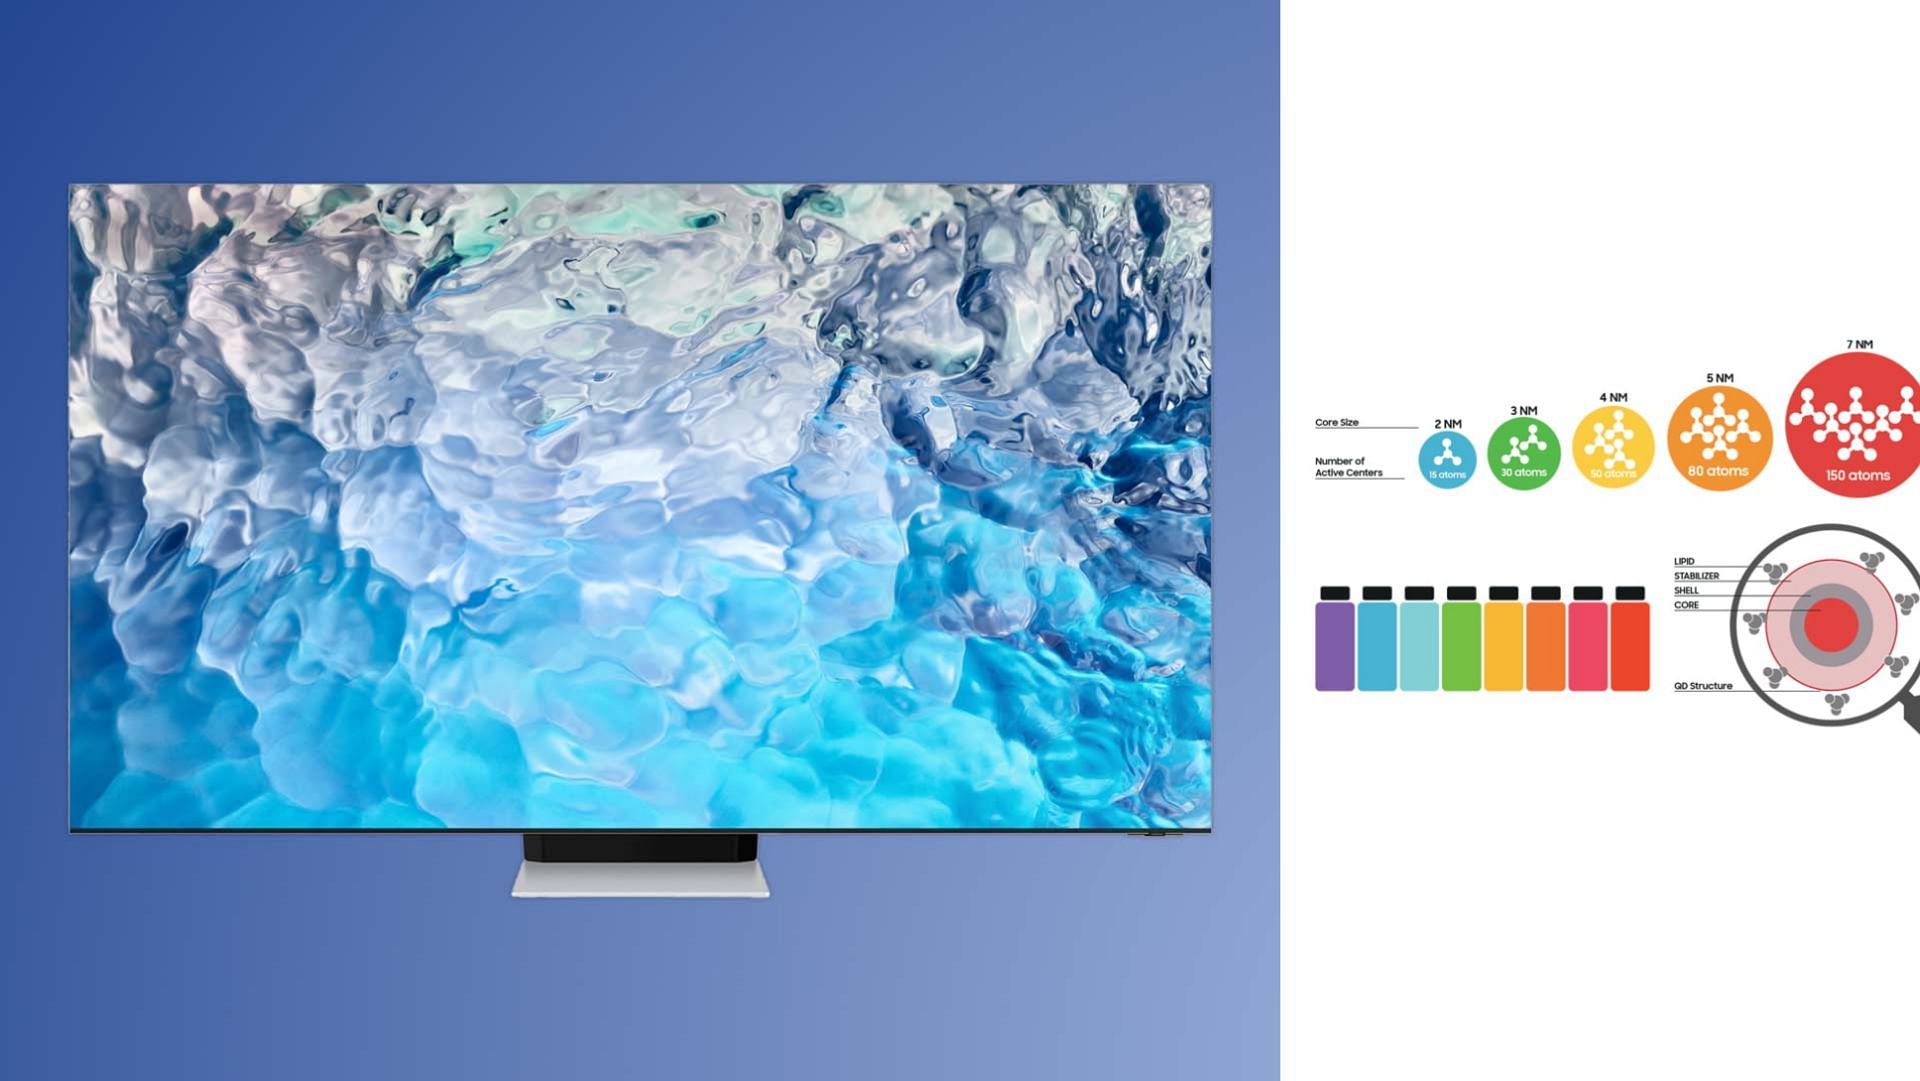 The new S95C employs QD-OLED for stunning colors  (image by Samsung)